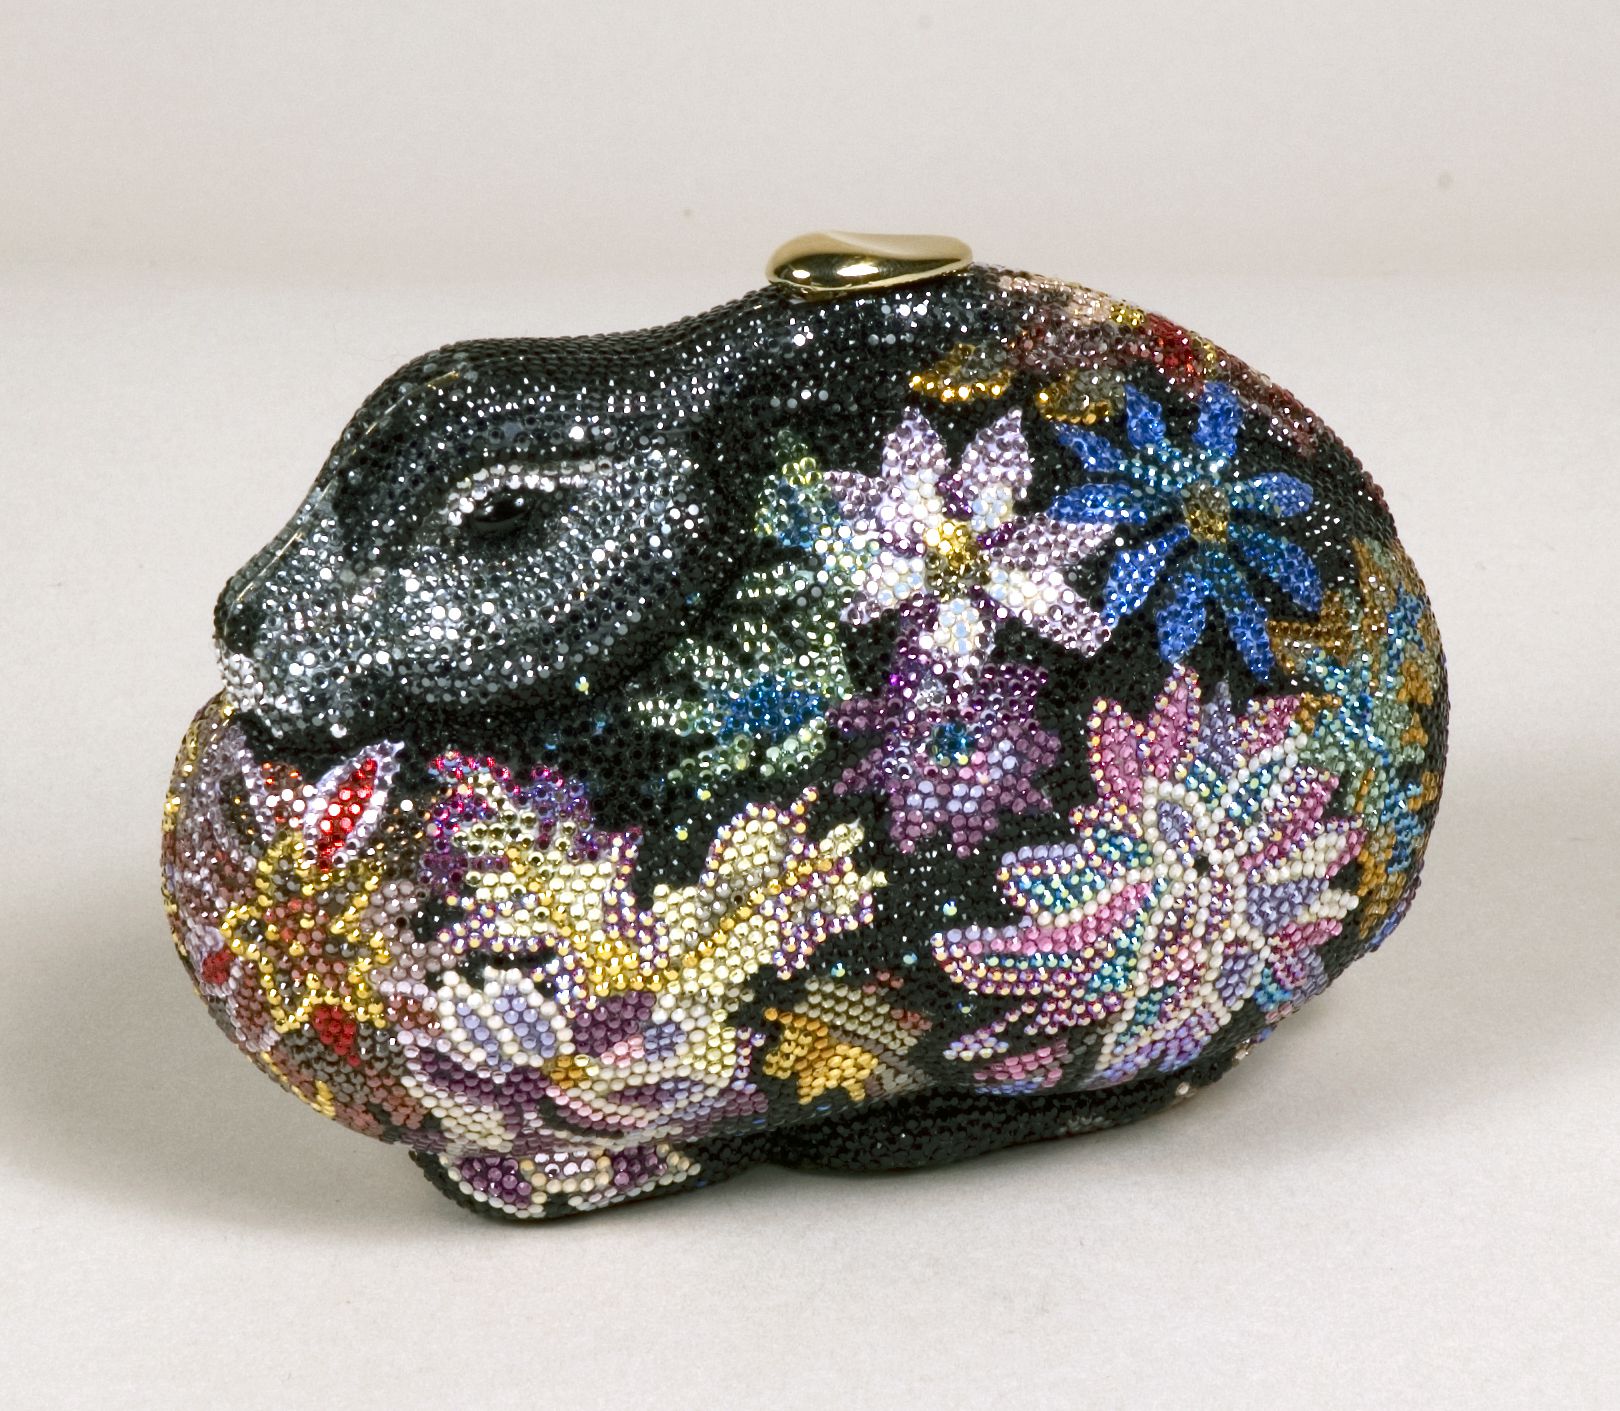 Rabbit clutch inlayed with colorful stones